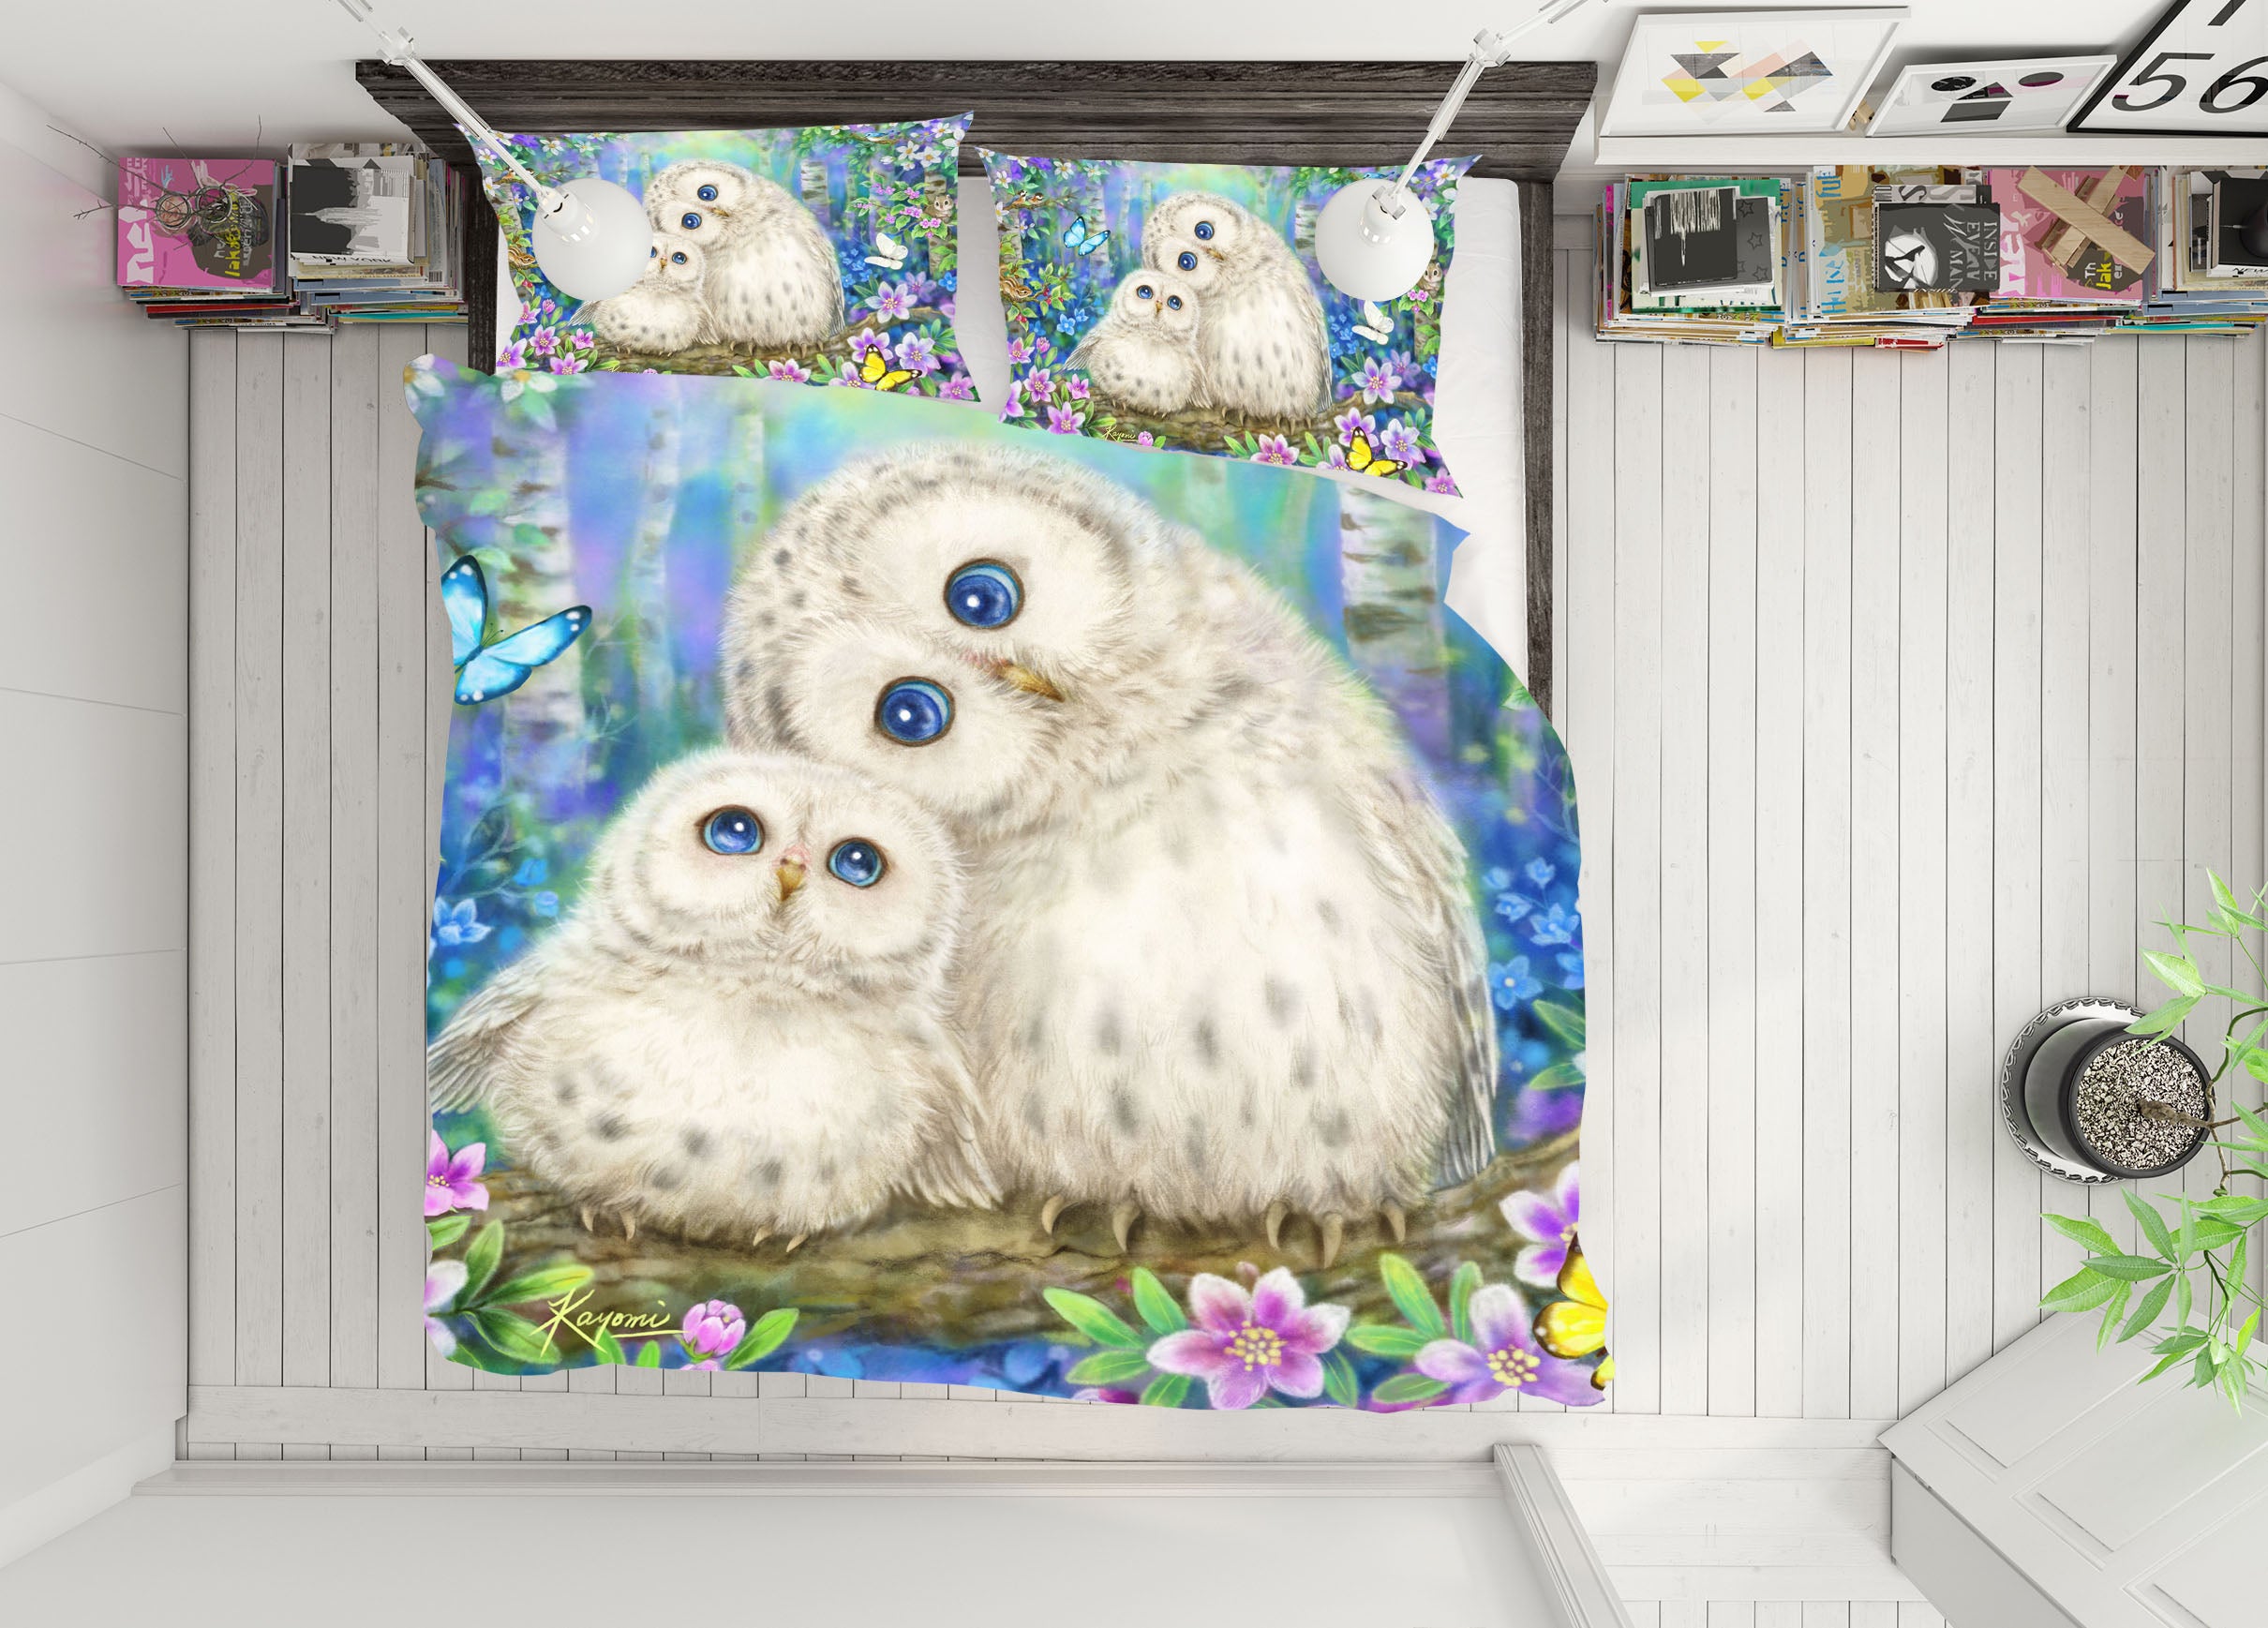 3D White Owl Butterfly 5943 Kayomi Harai Bedding Bed Pillowcases Quilt Cover Duvet Cover